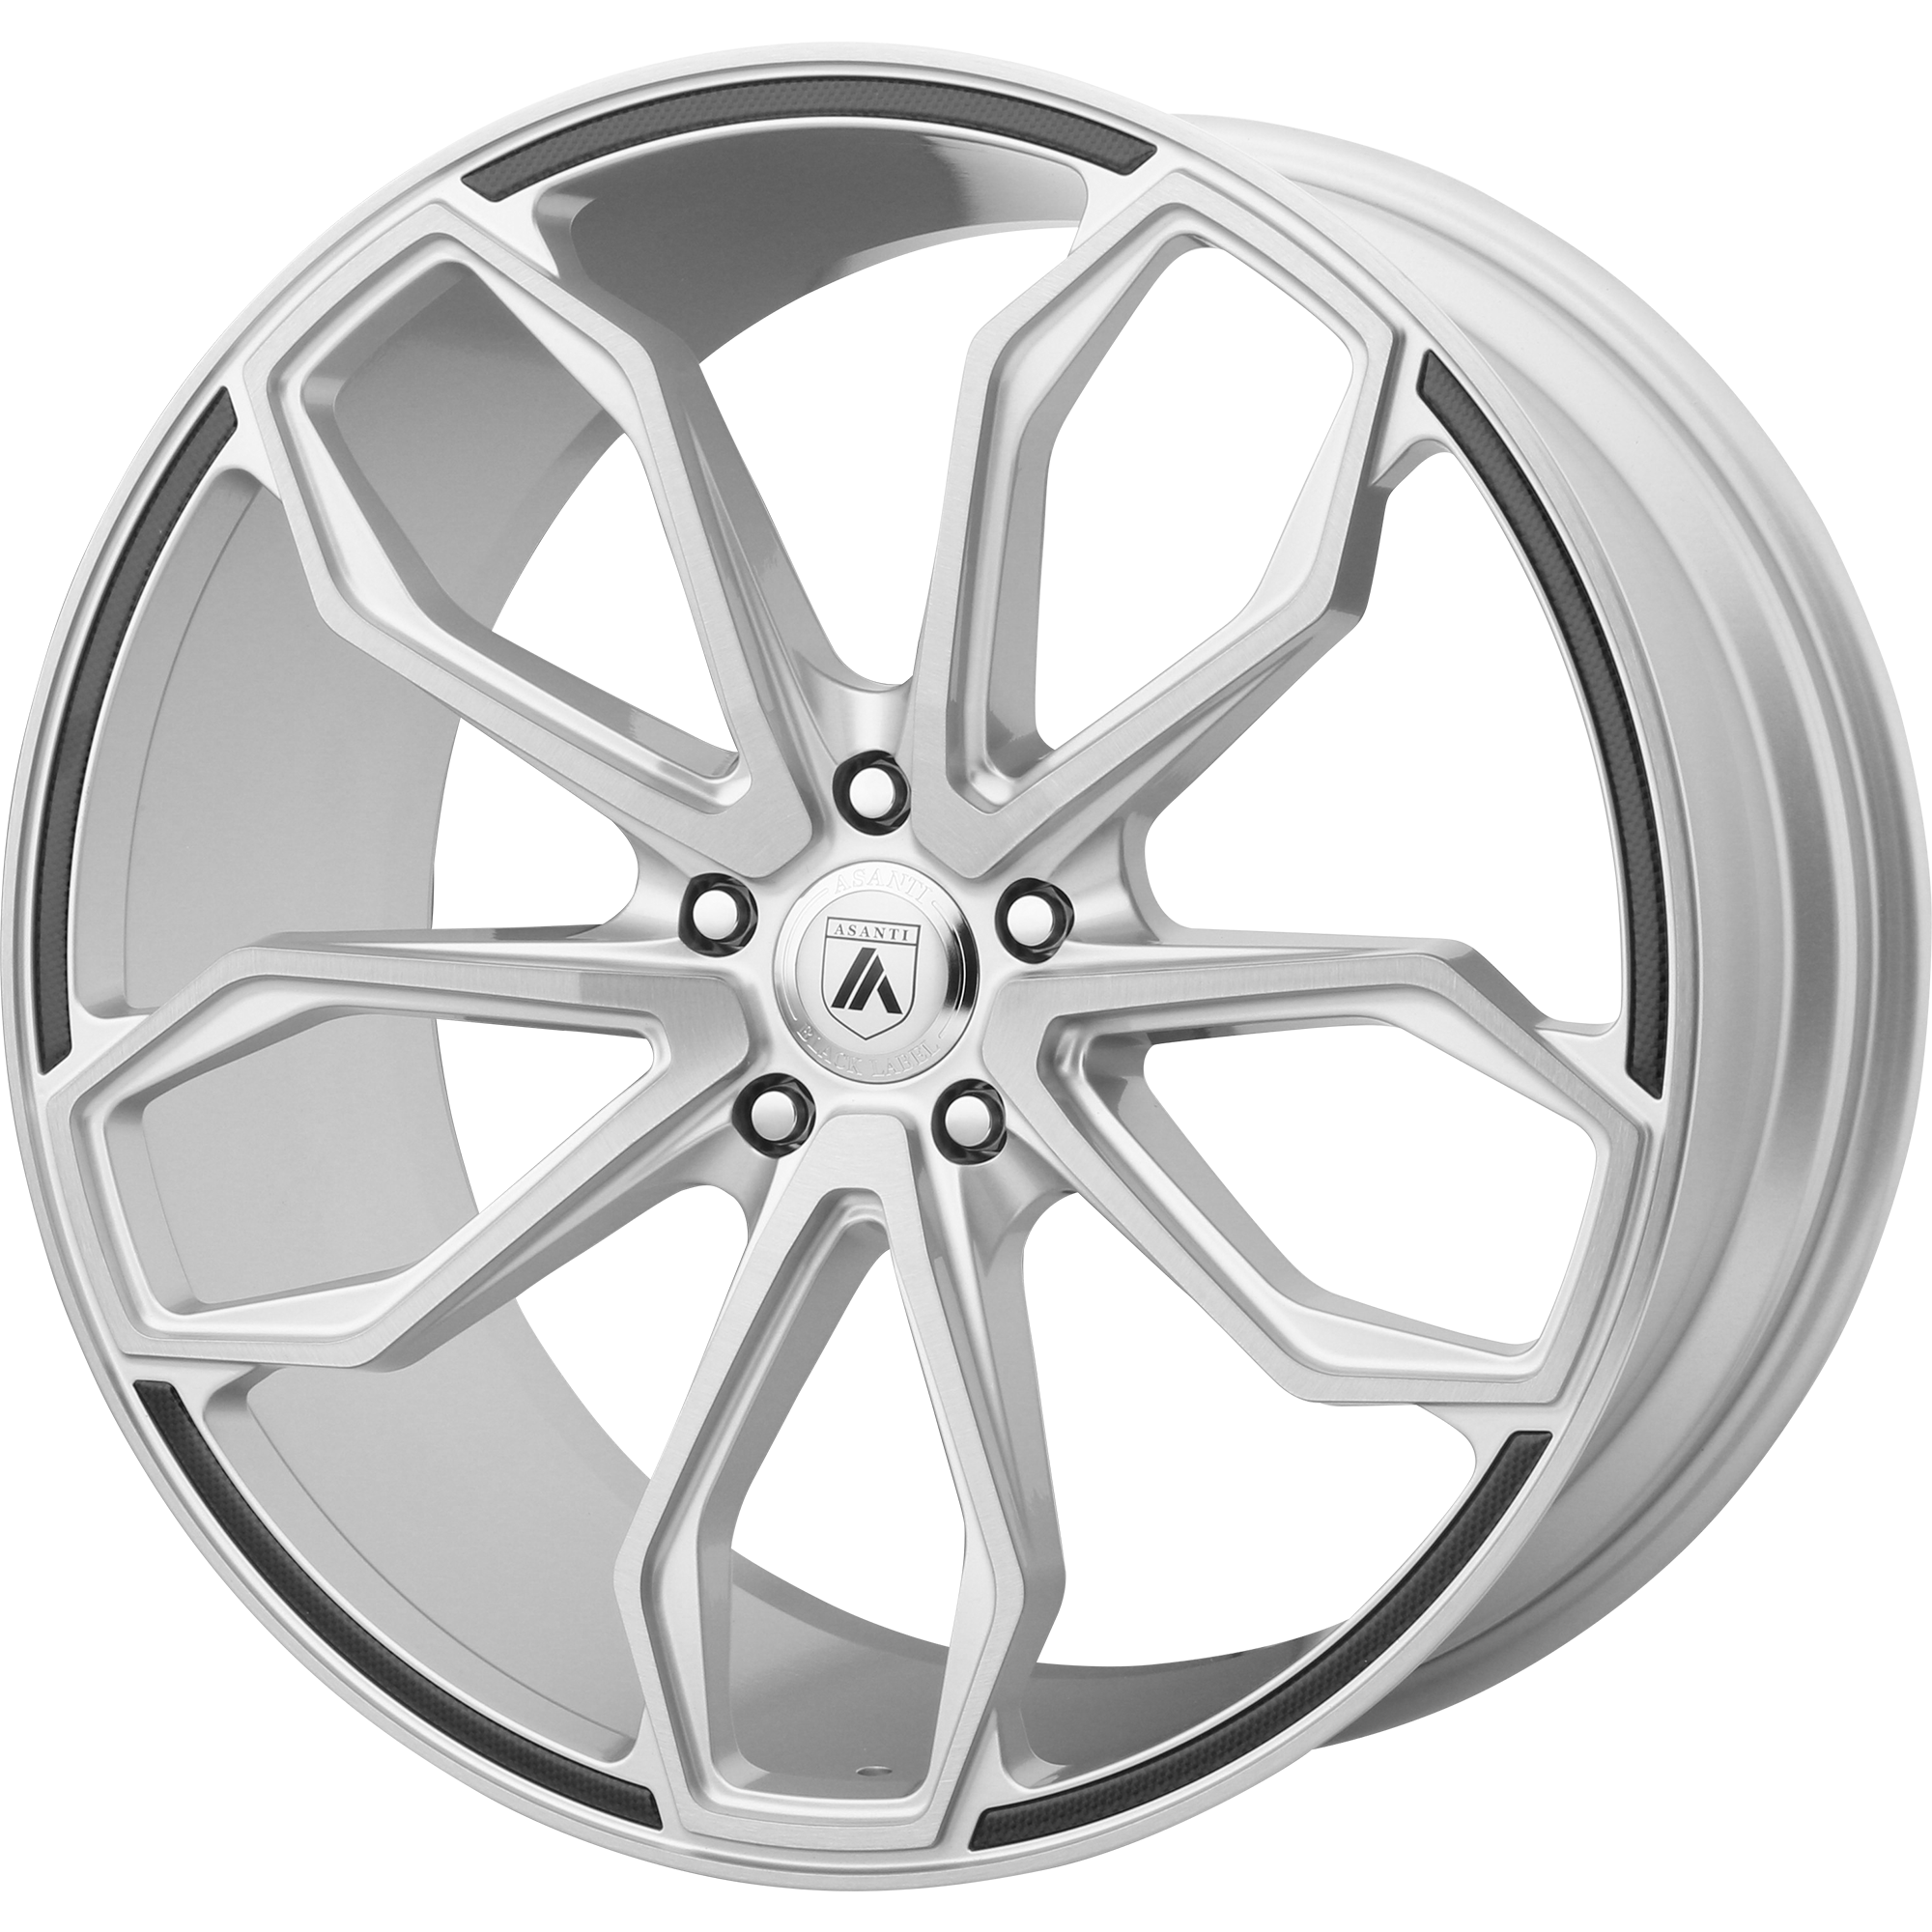 ATHENA 22x10.5 5x114.30 BRUSHED SILVER (35 mm) - Tires and Engine Performance